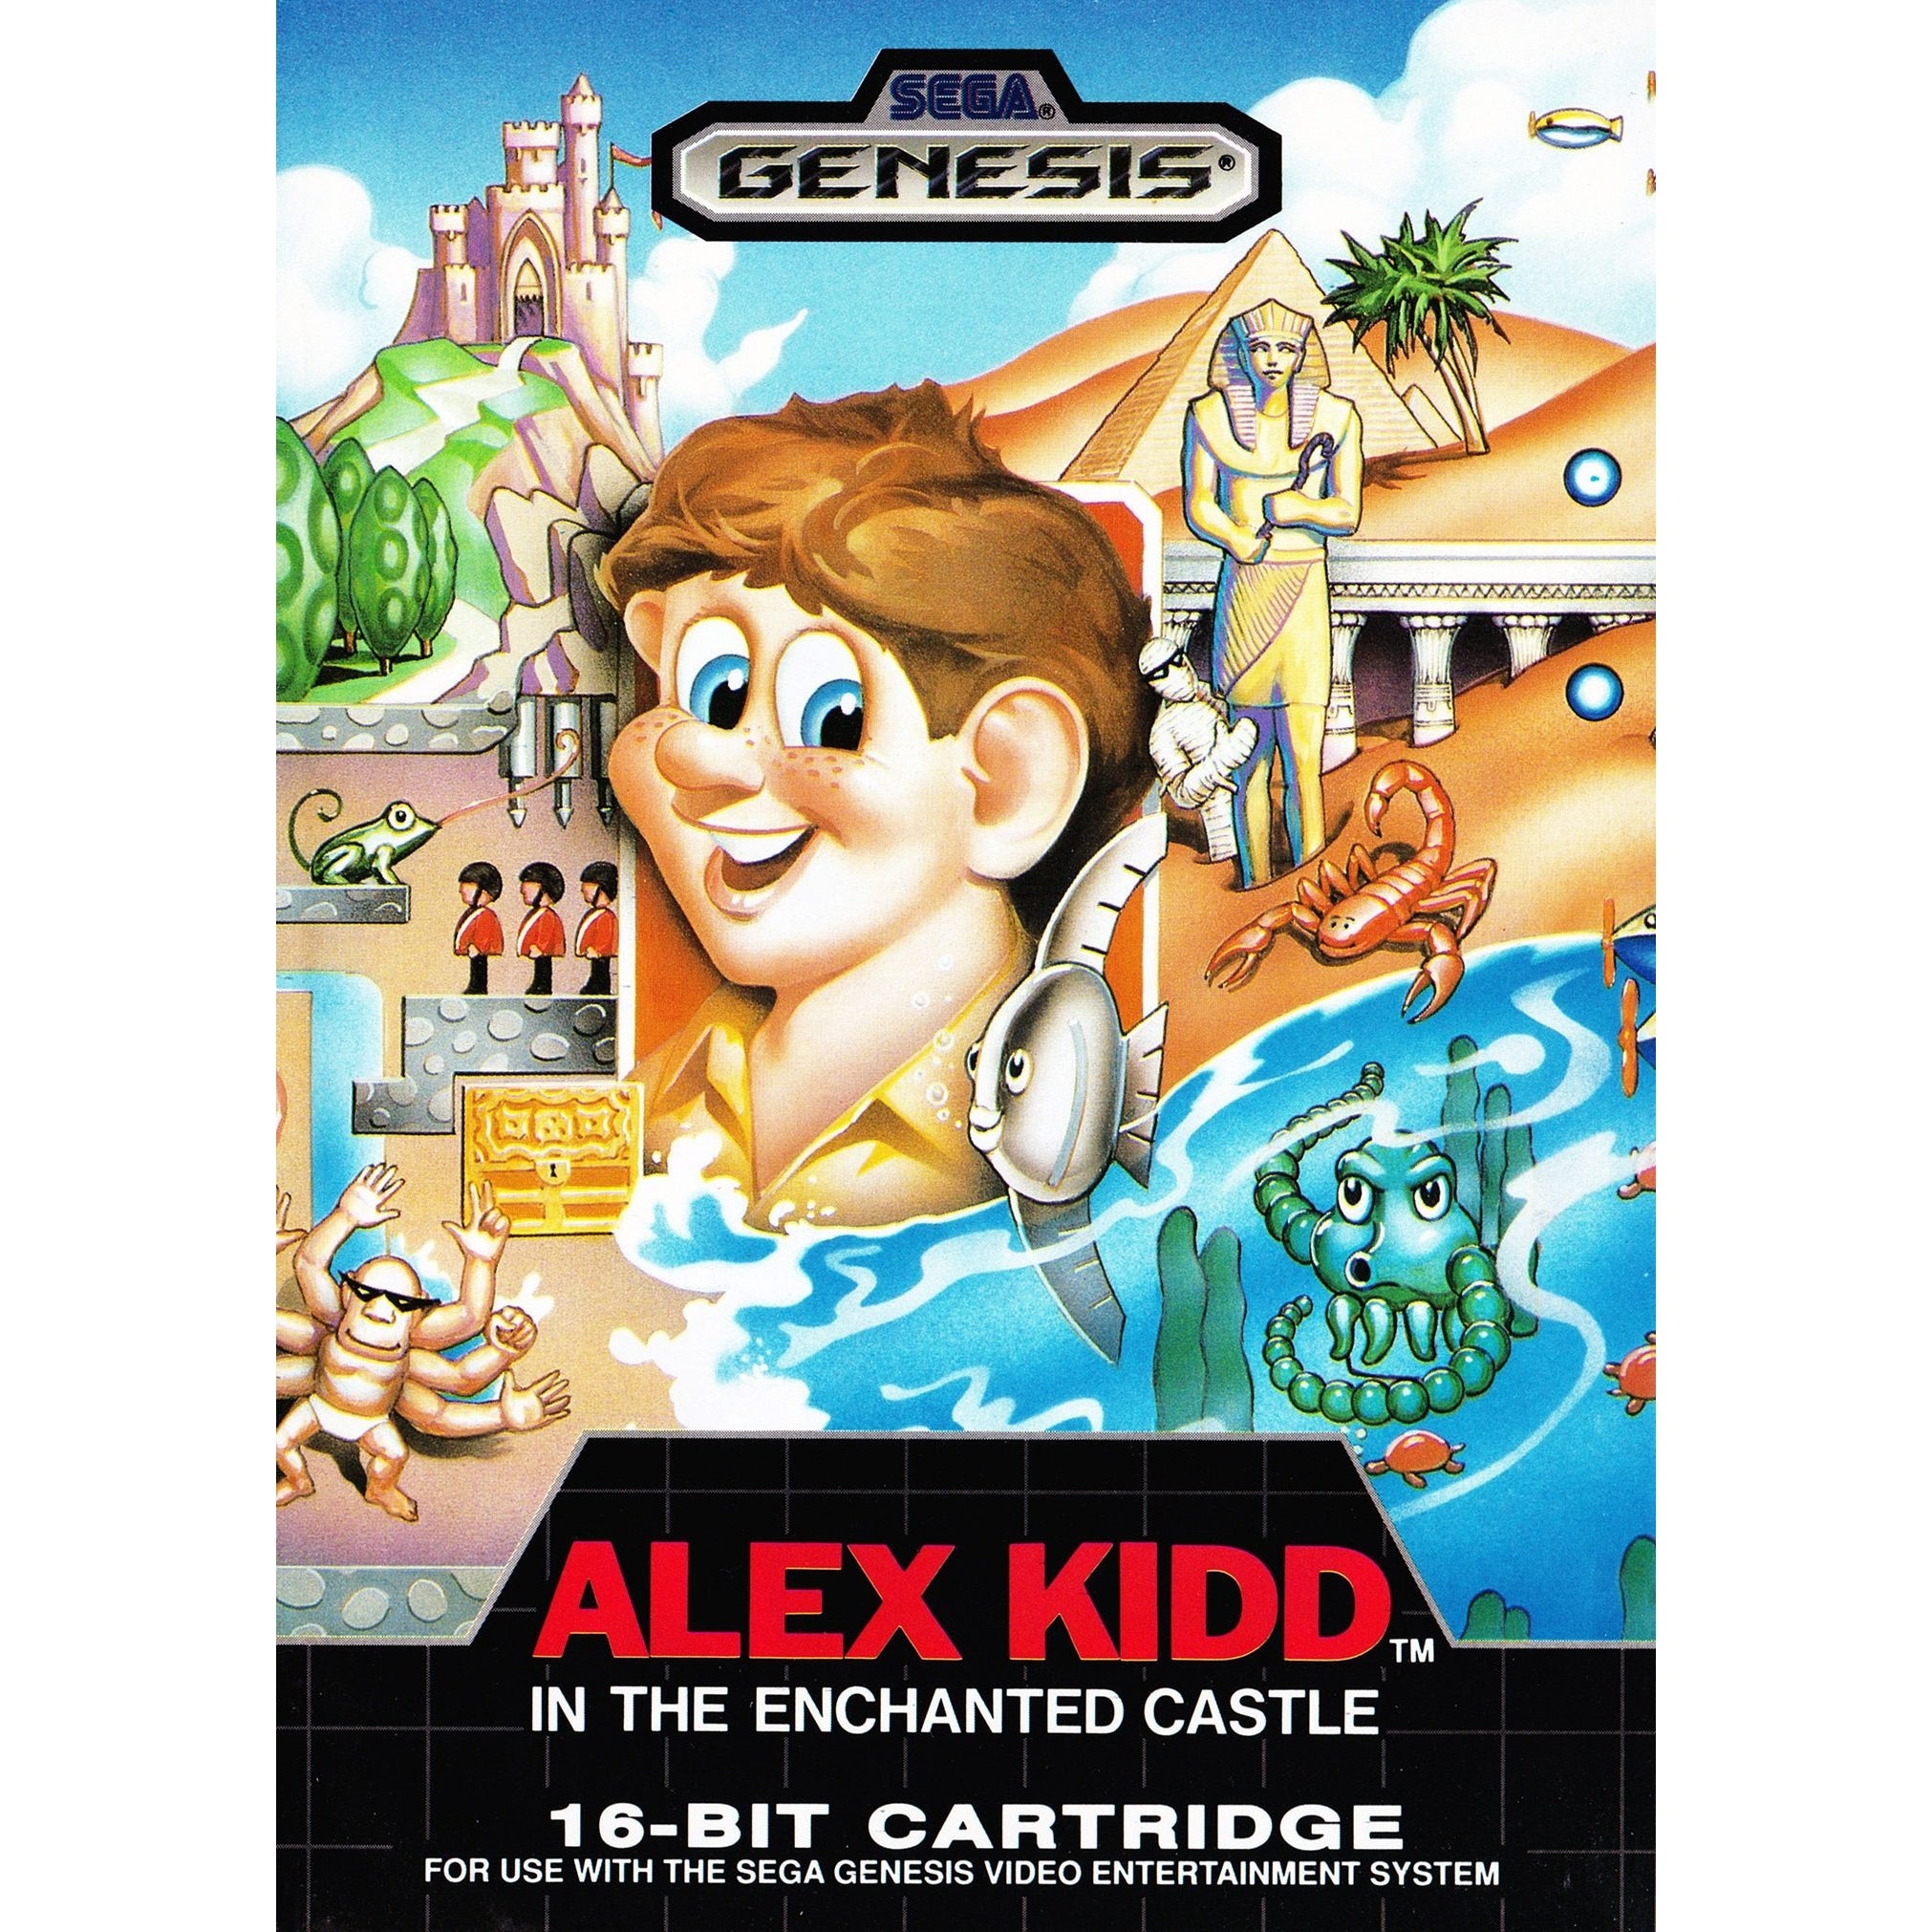 Alex Kidd in the Enchanted Castle - Sega Genesis Game Complete - YourGamingShop.com - Buy, Sell, Trade Video Games Online. 120 Day Warranty. Satisfaction Guaranteed.